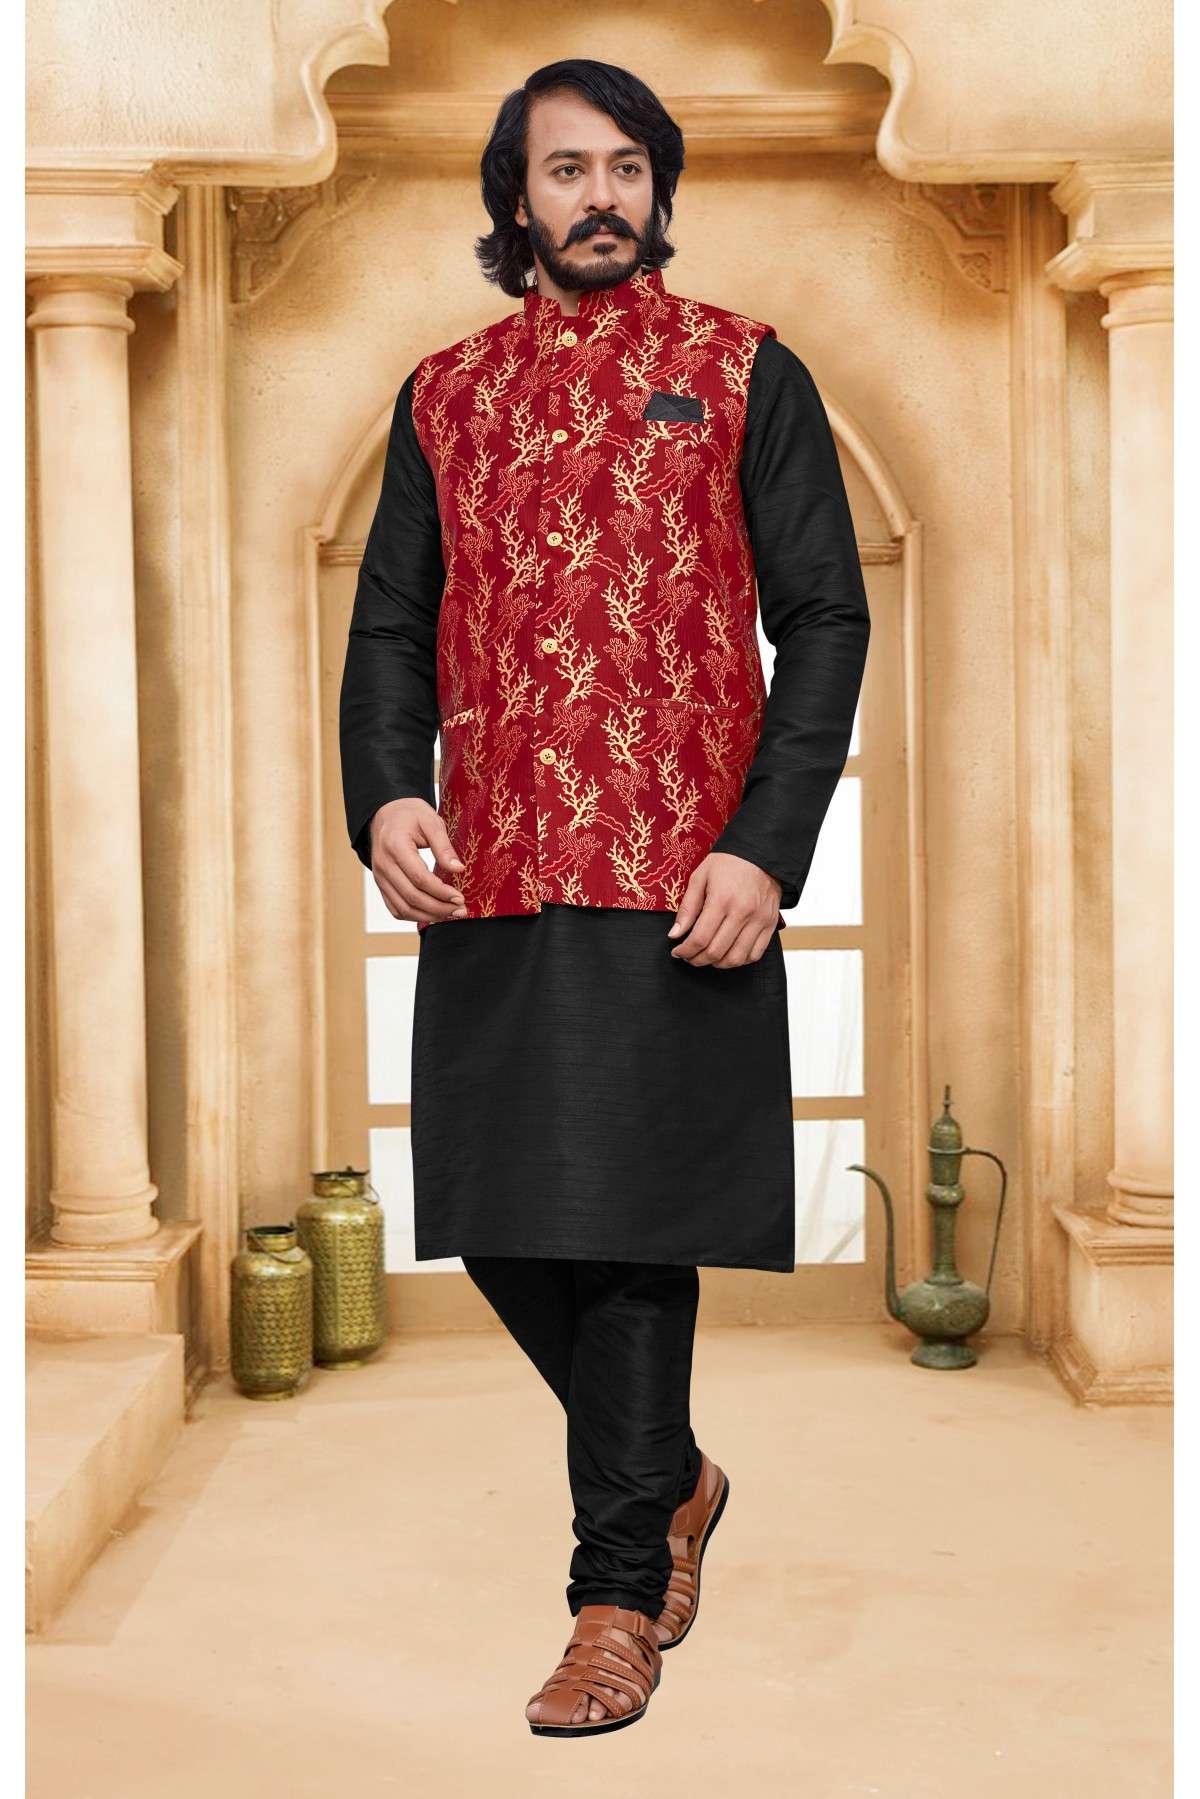 Art Silk And Jacquard Woven Kurta Pajama With Jacket In Black And Maroon Colour - KP1047595